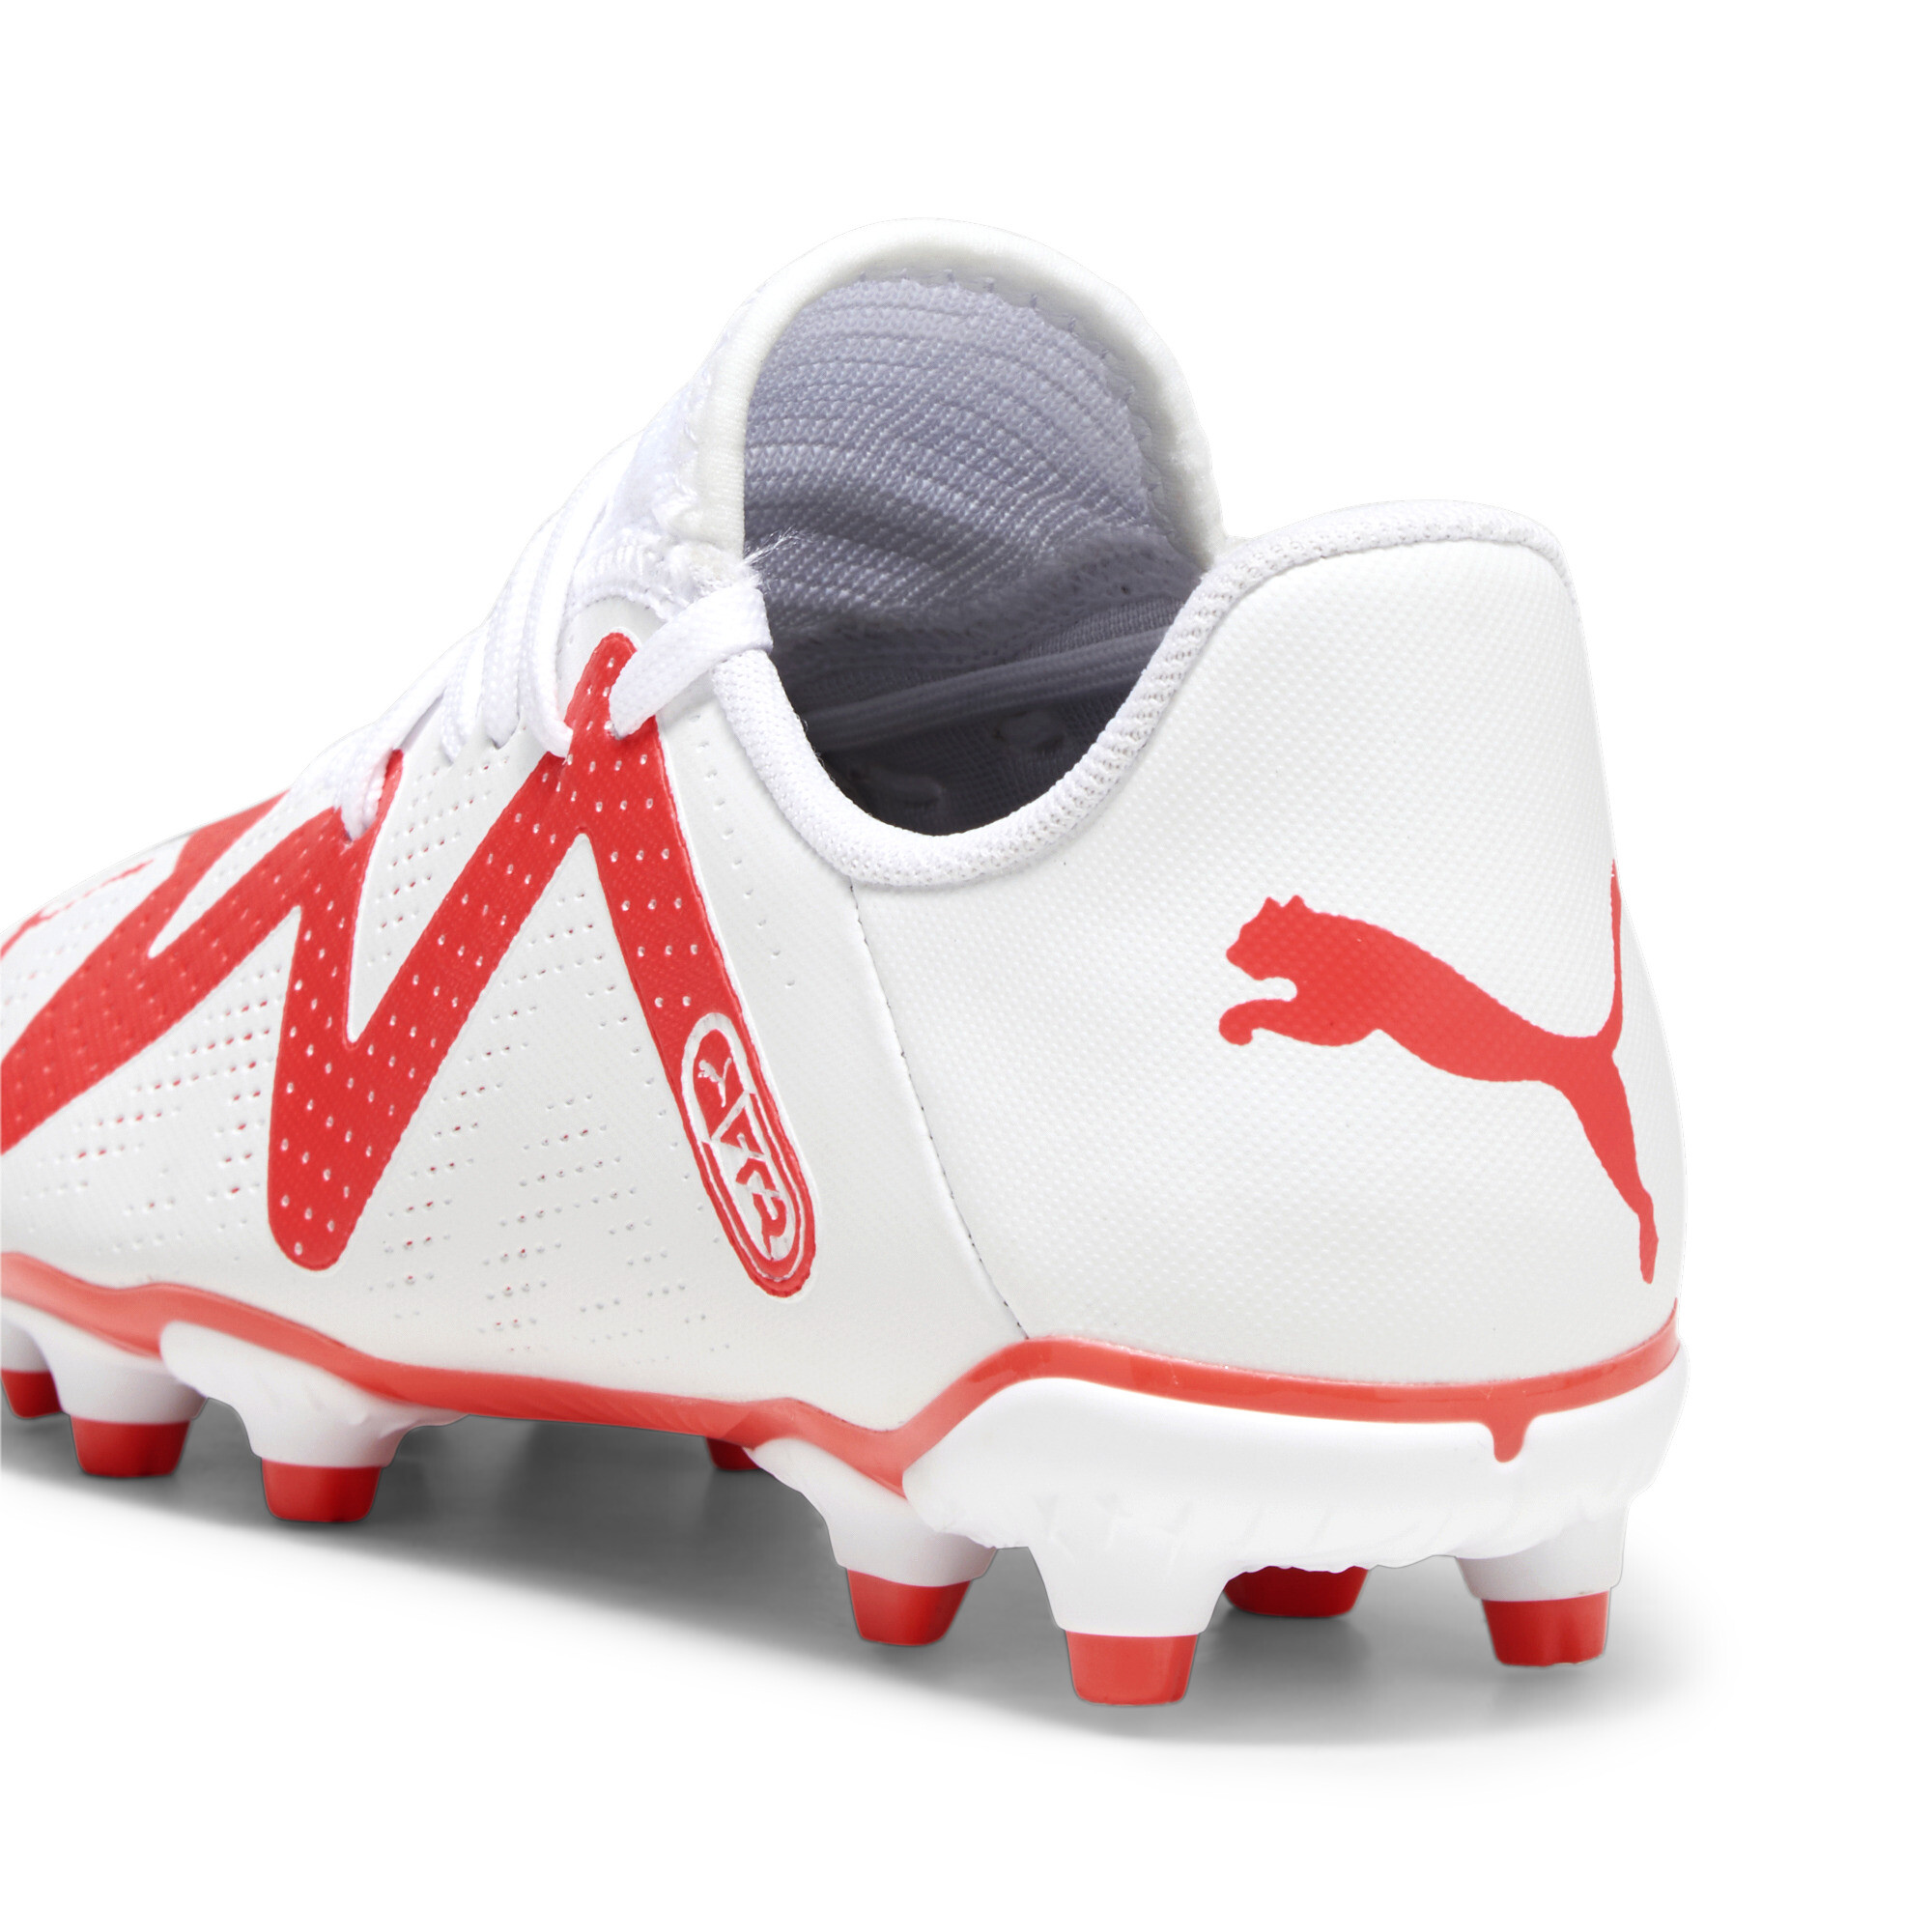 Puma FUTURE PLAY FG/AG Youth Football Boots, White, Size 36, Shoes